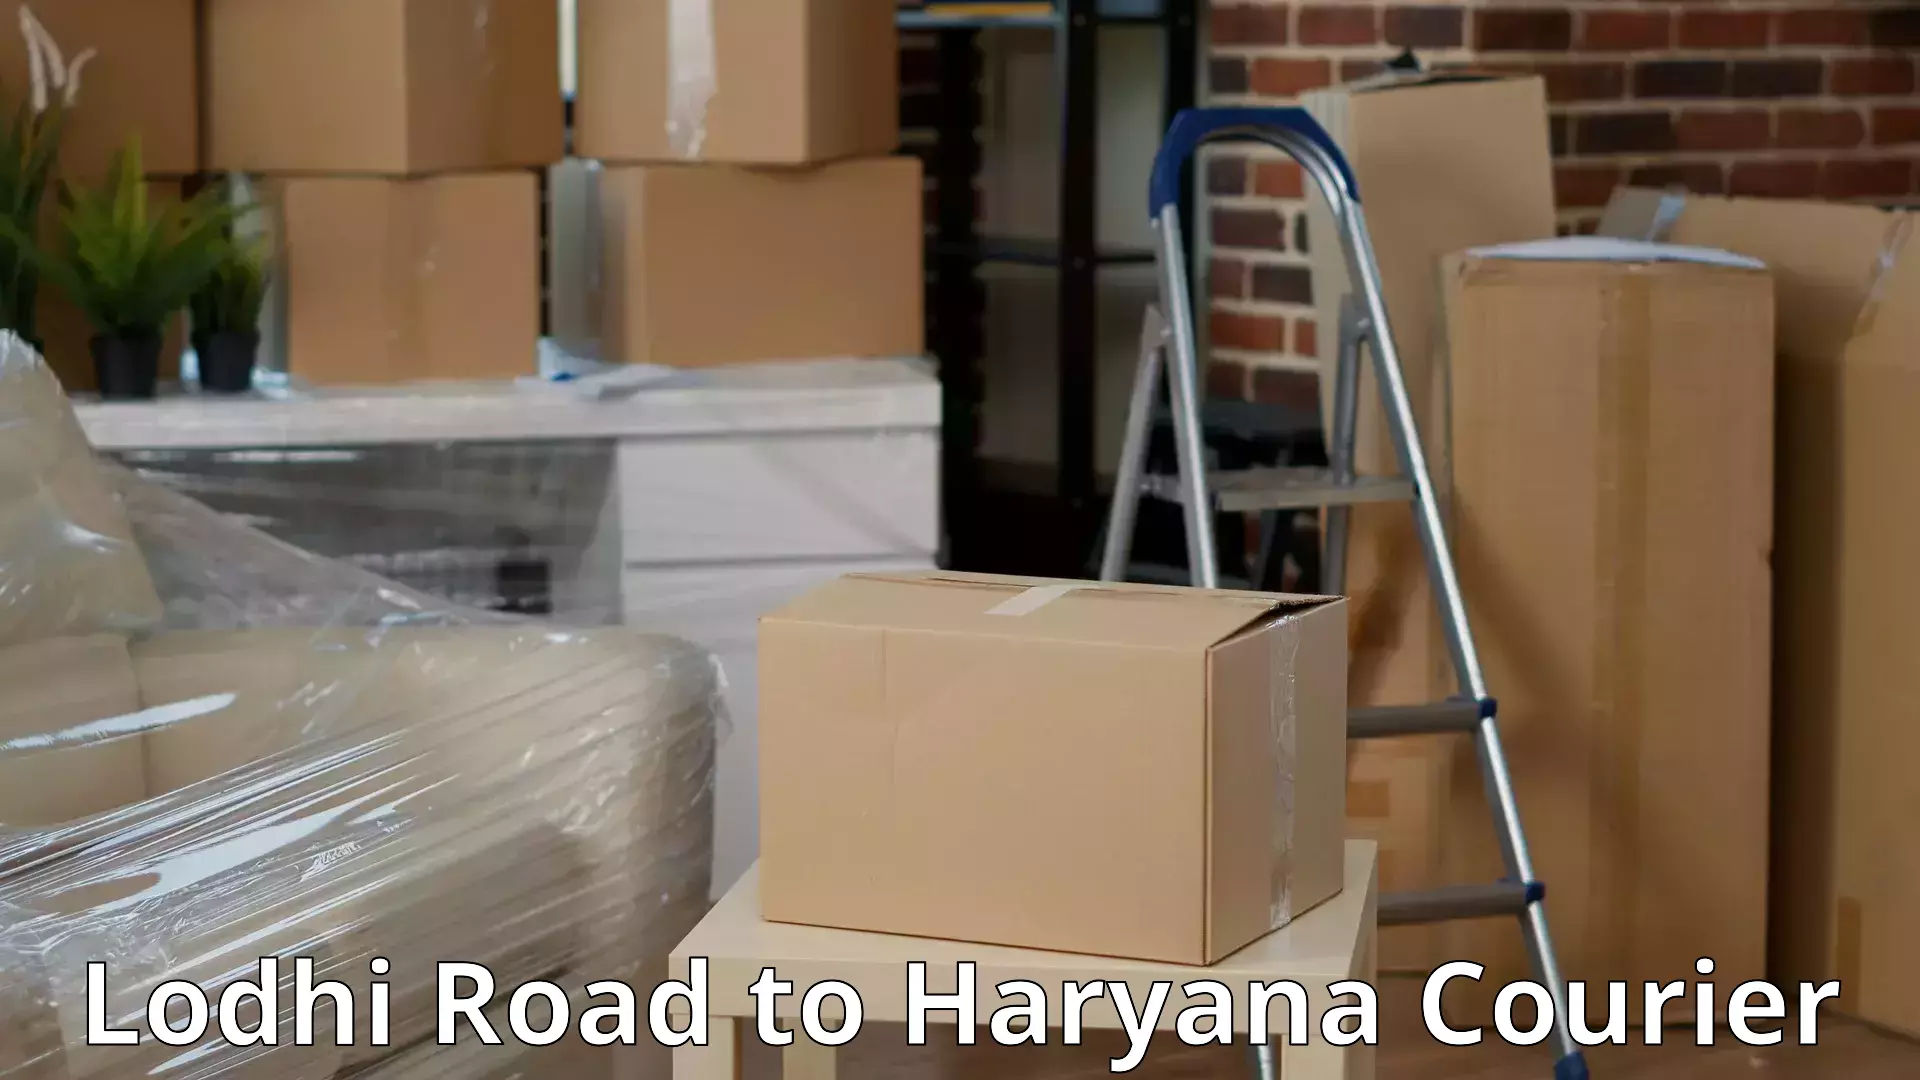 Home moving experts Lodhi Road to NCR Haryana